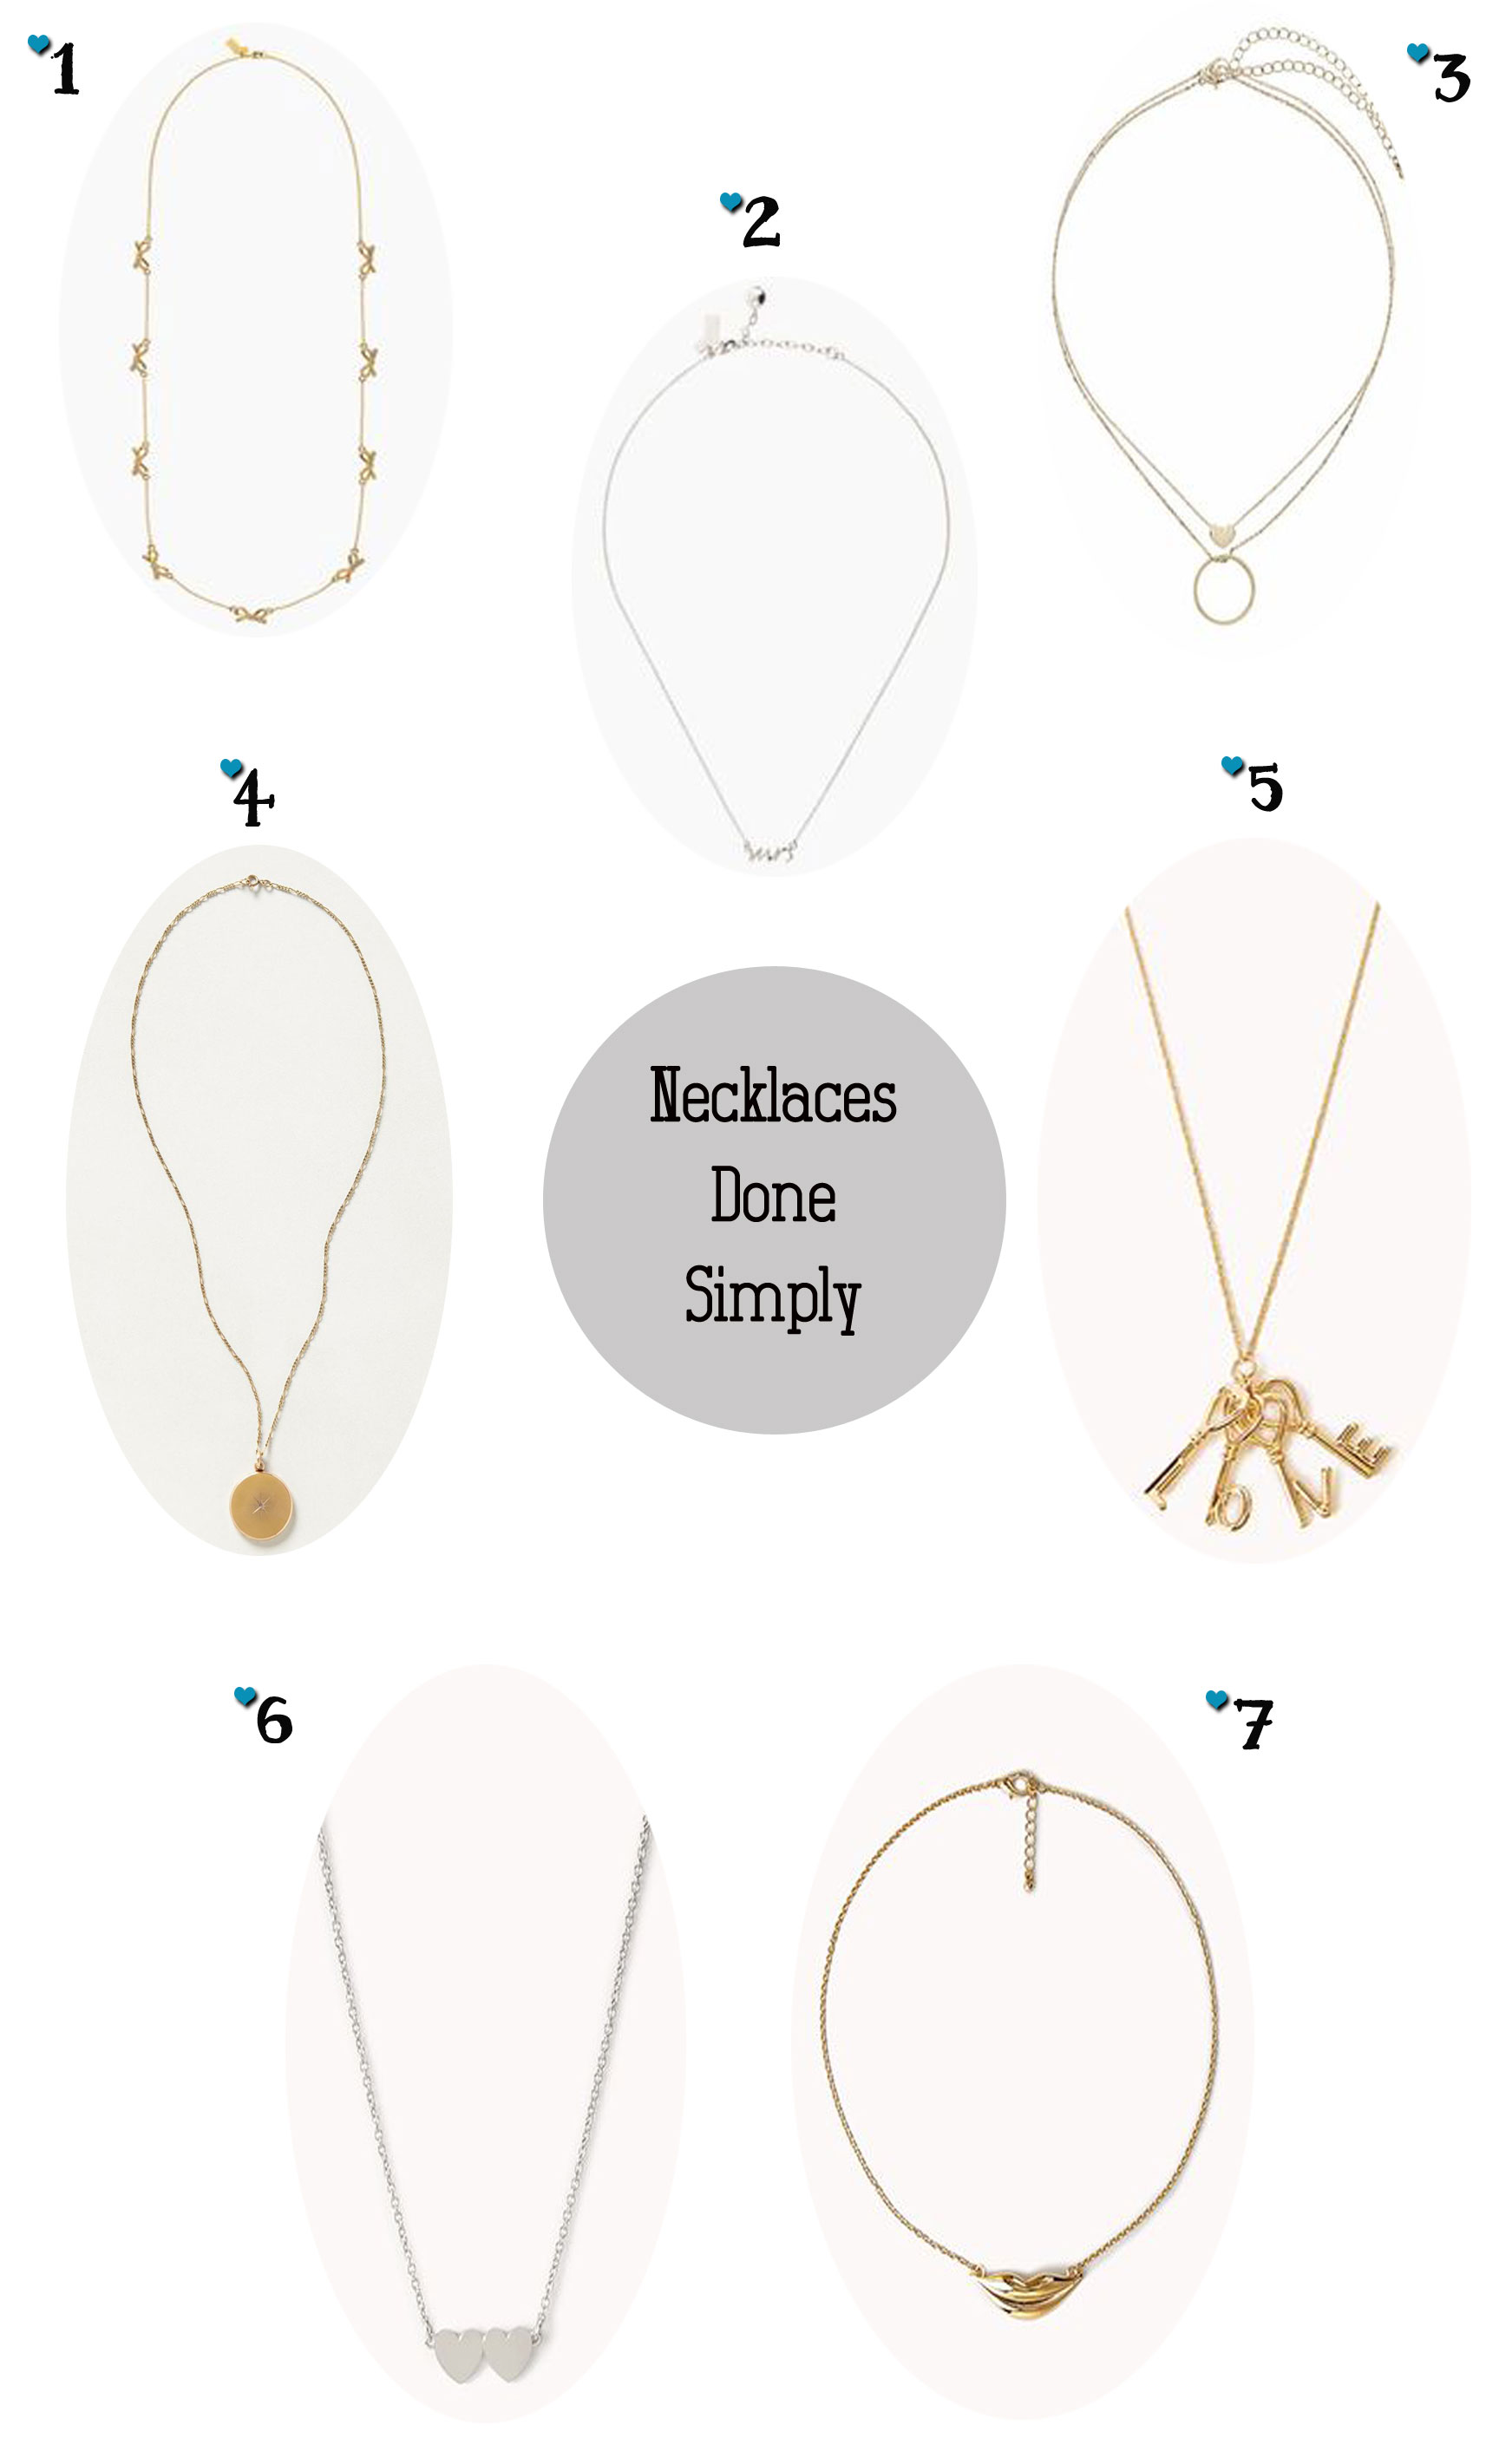 Necklaces with a Simple Statement - ShuGar Love